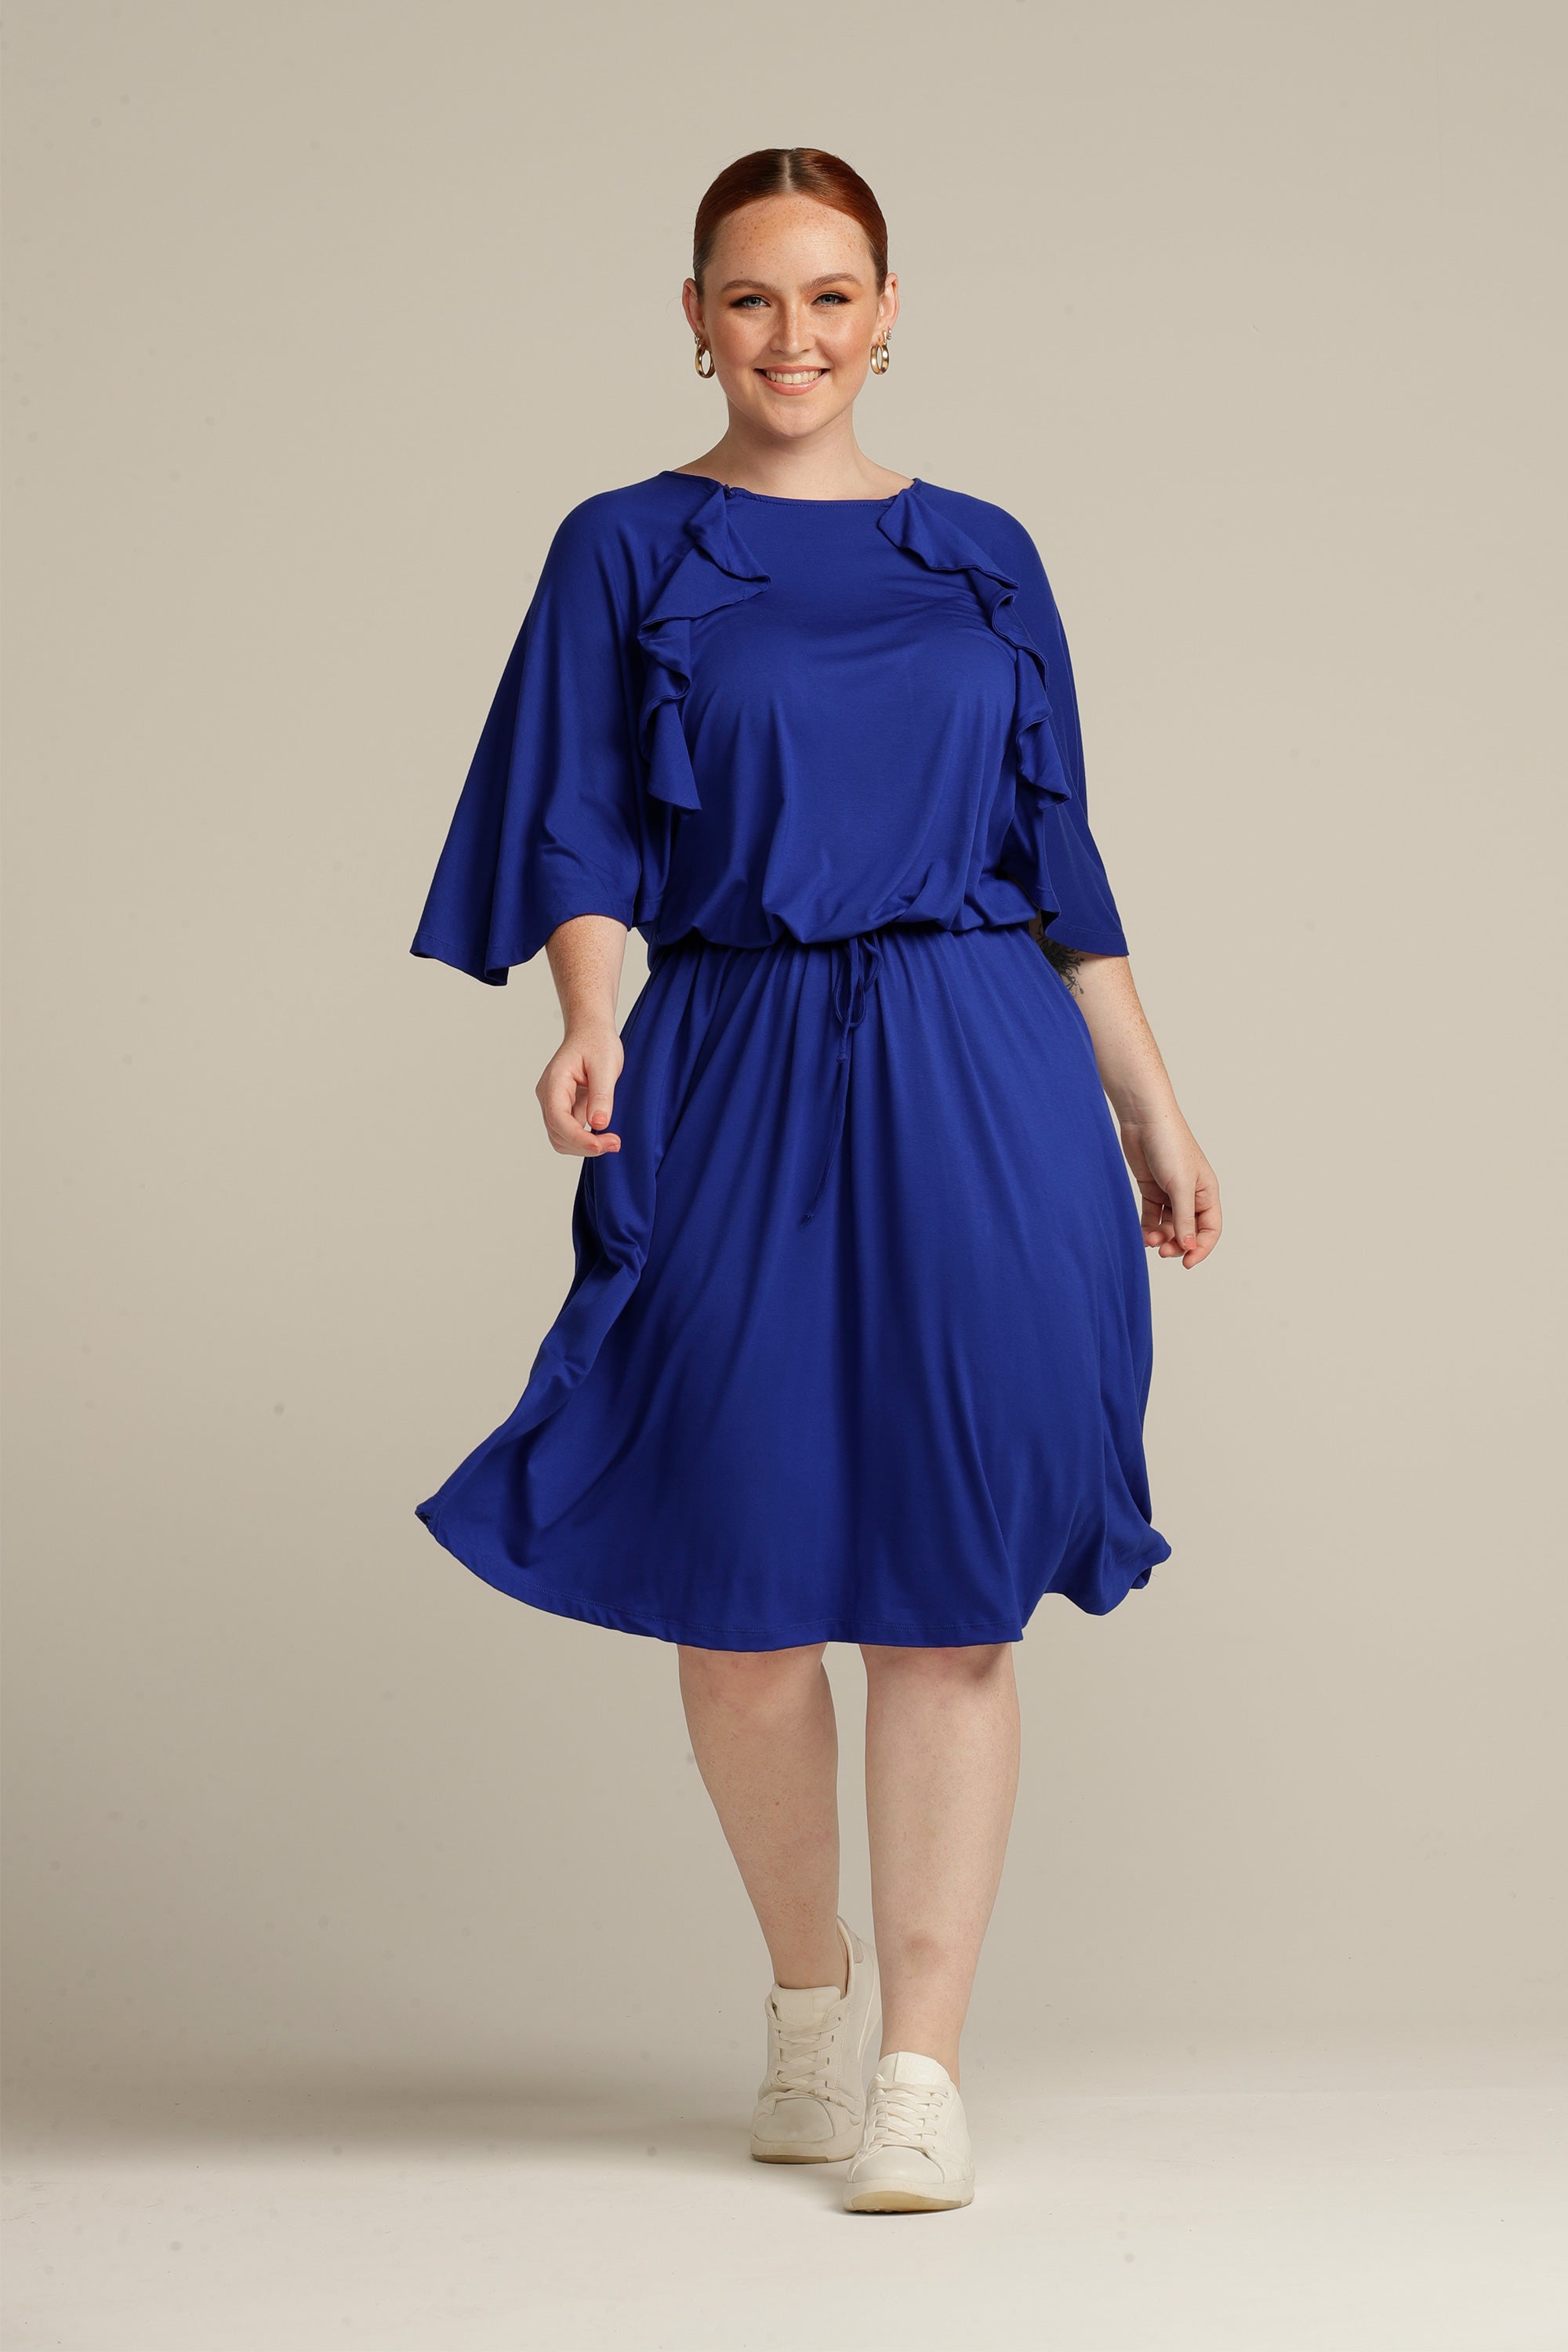 Plus sized woman walking in royal blue dress with port access